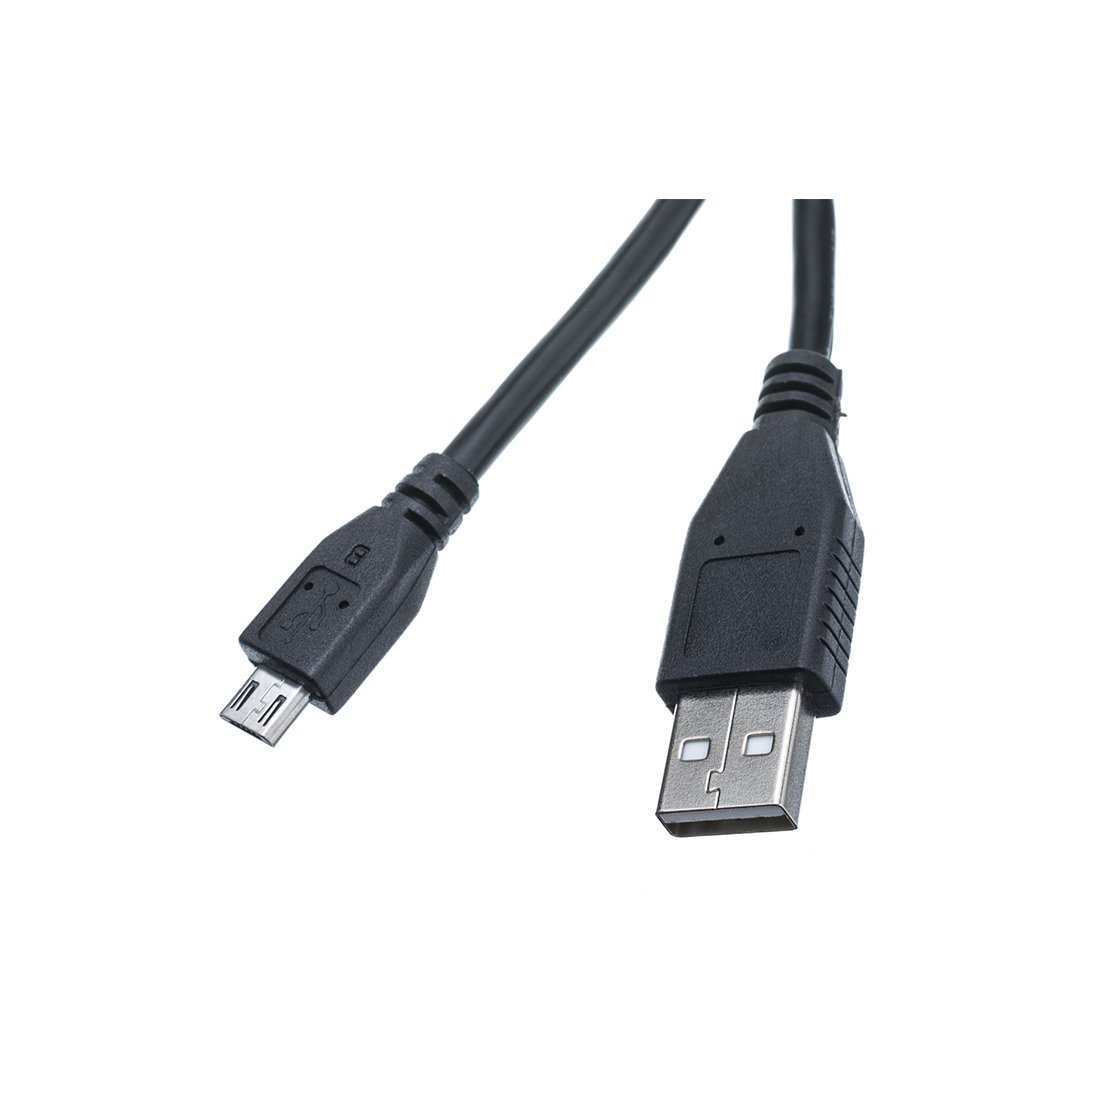 Geroosterd Antagonist beven CAB-USB-MICROB-3 Micro USB 2.0 Cable, Type A to Micro B, 3ft